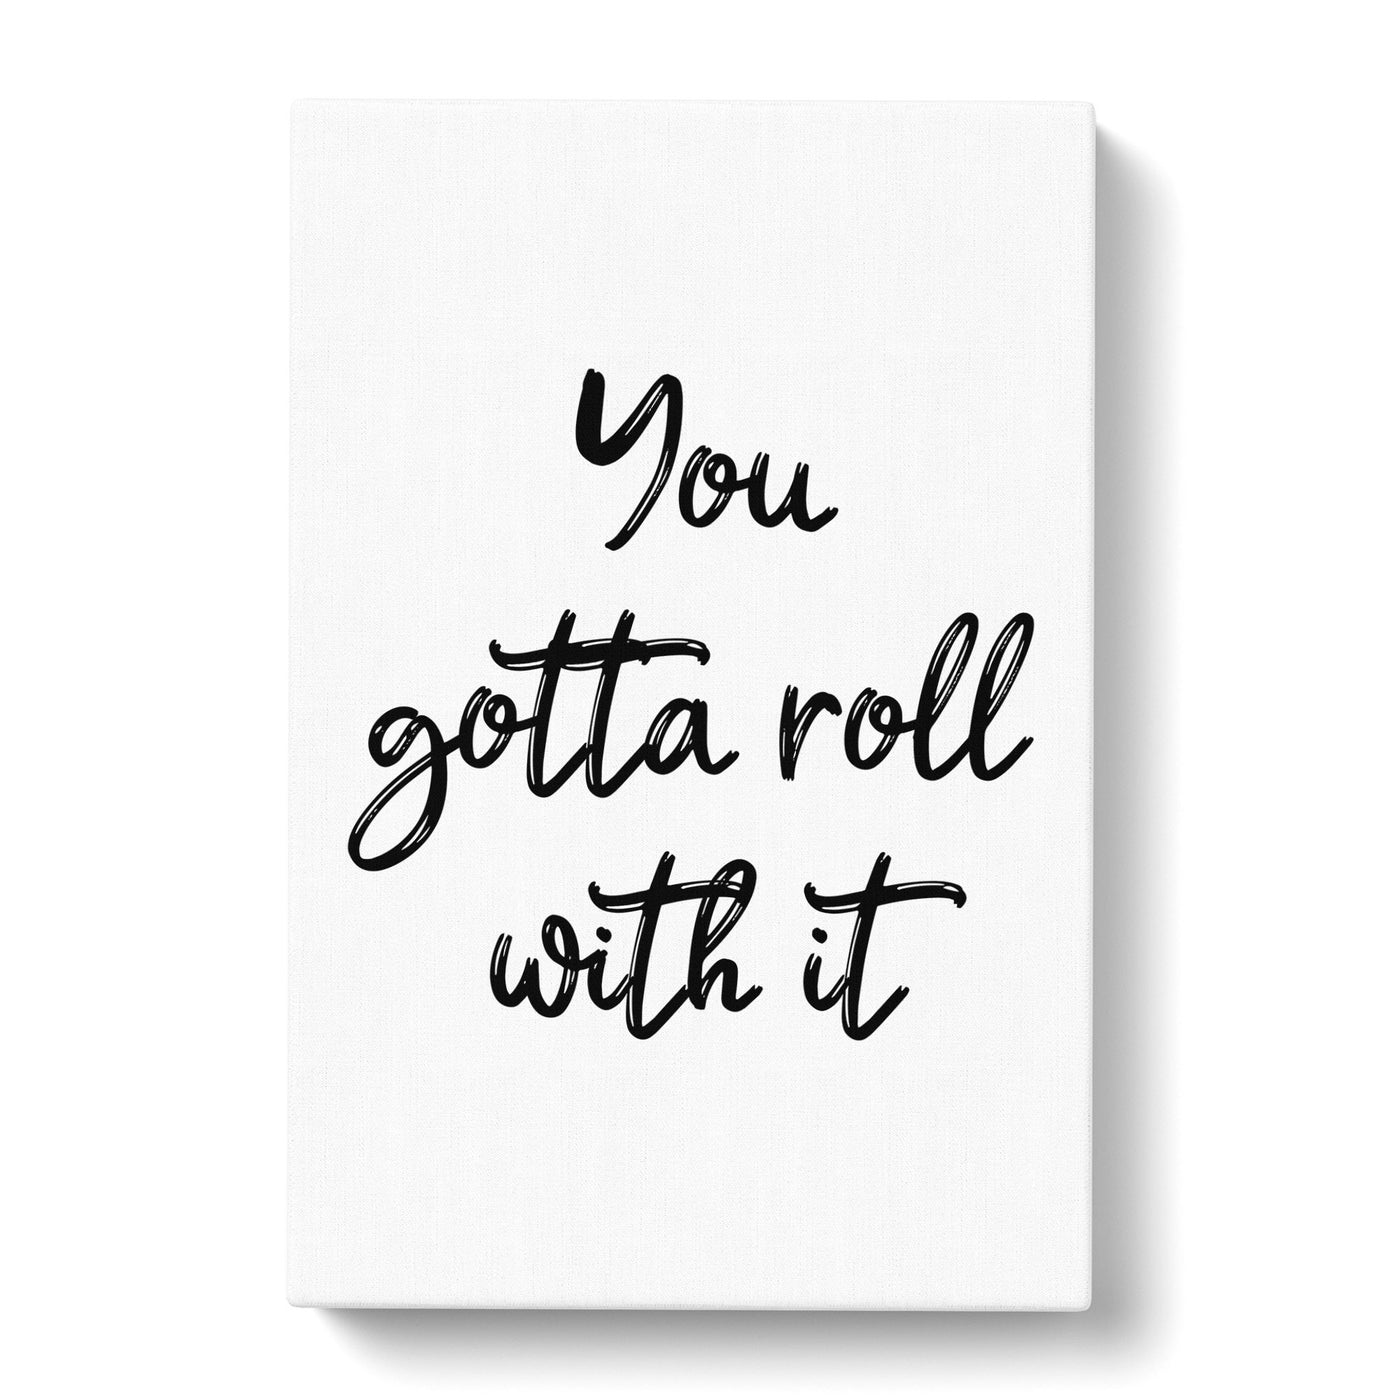 You Gotta Roll With It Typography Canvas Print Main Image